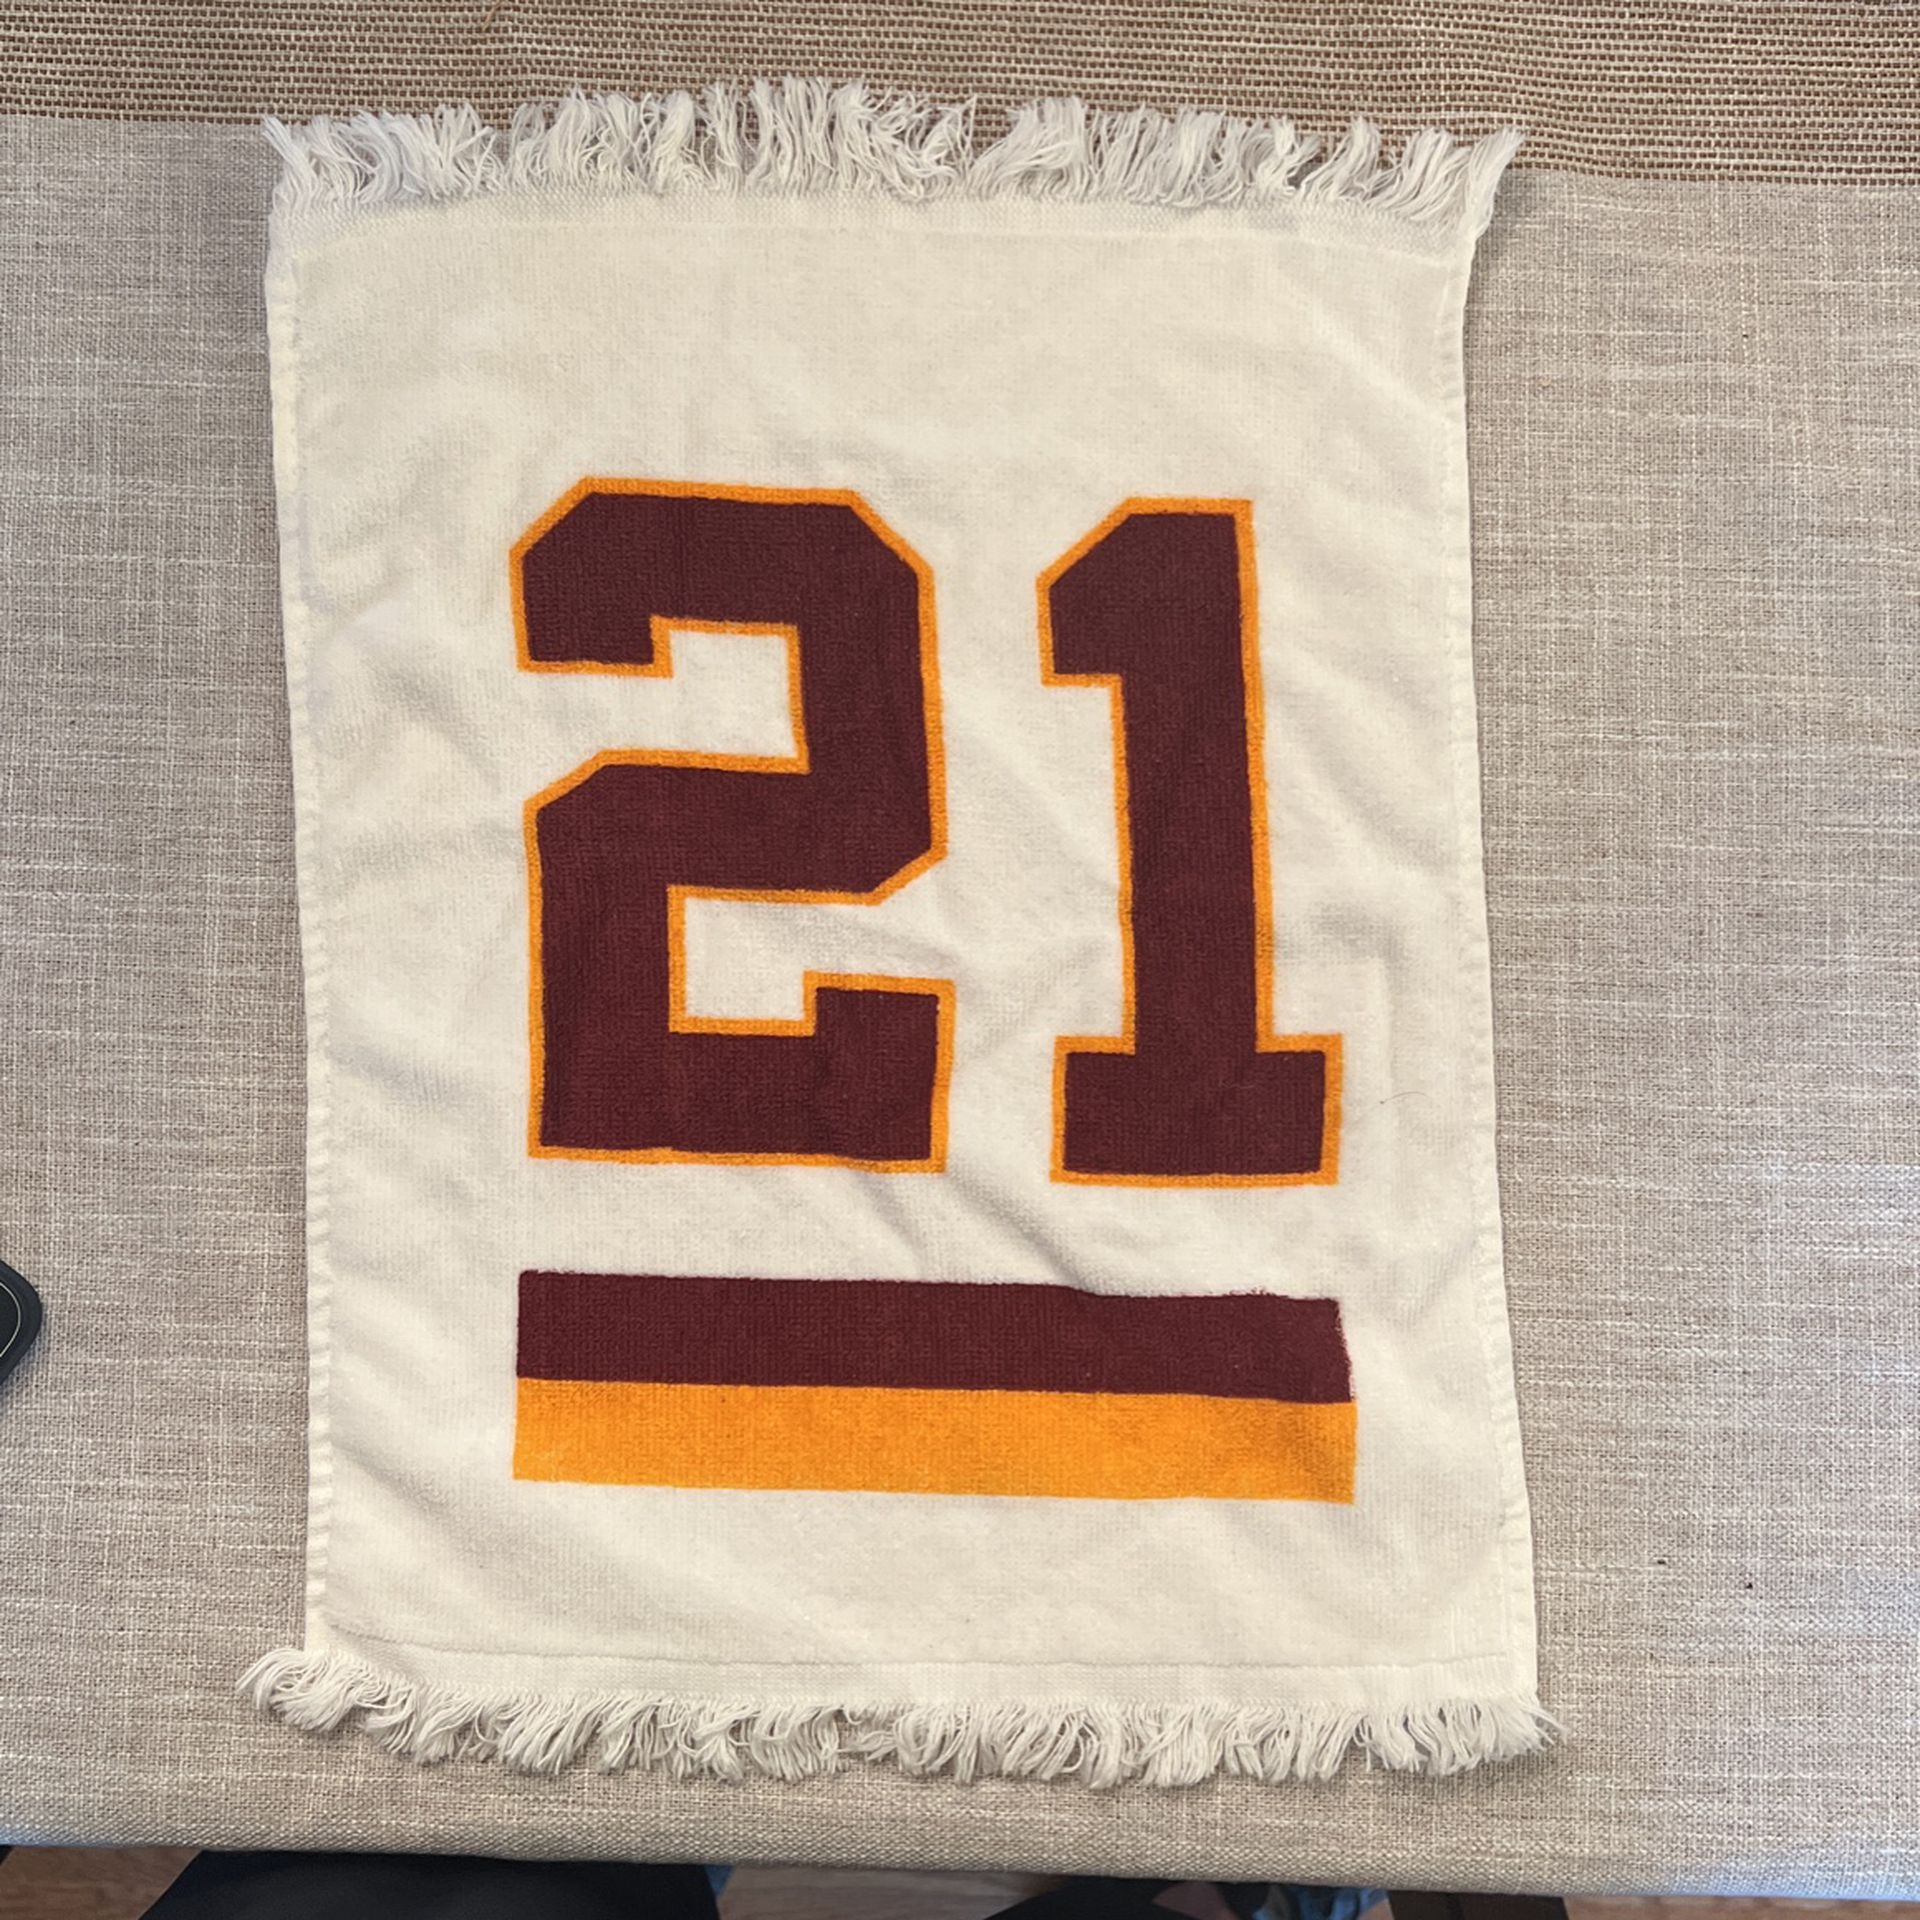 *Very Rare* Redskins Sean Taylor Original Memorial Towel (handed out once)